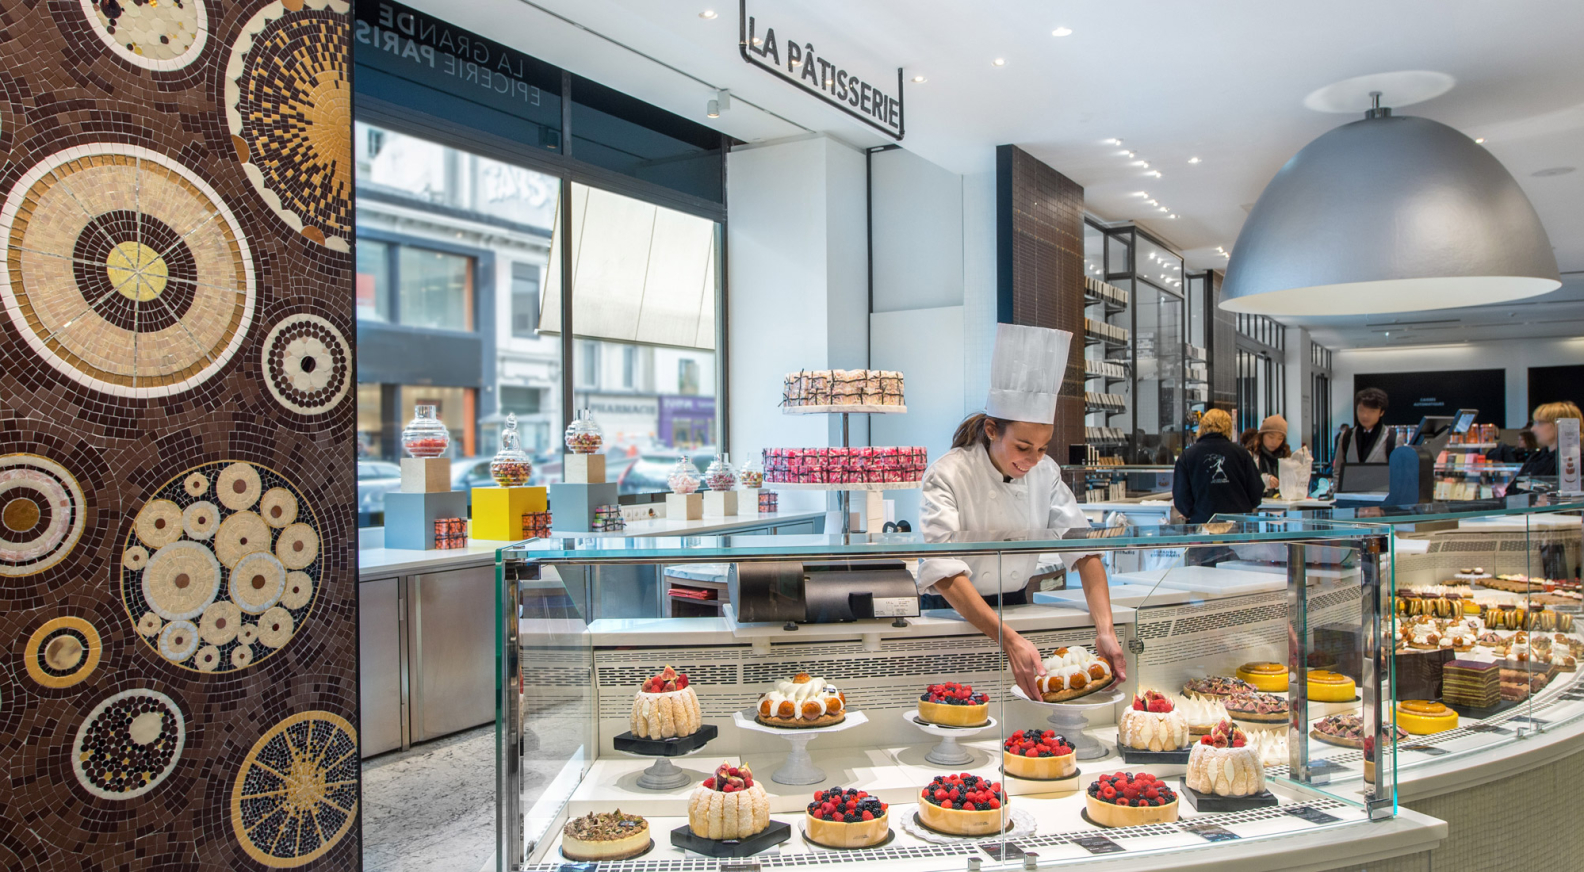 If only Louis Vuitton decided to open a french bakery, by the very